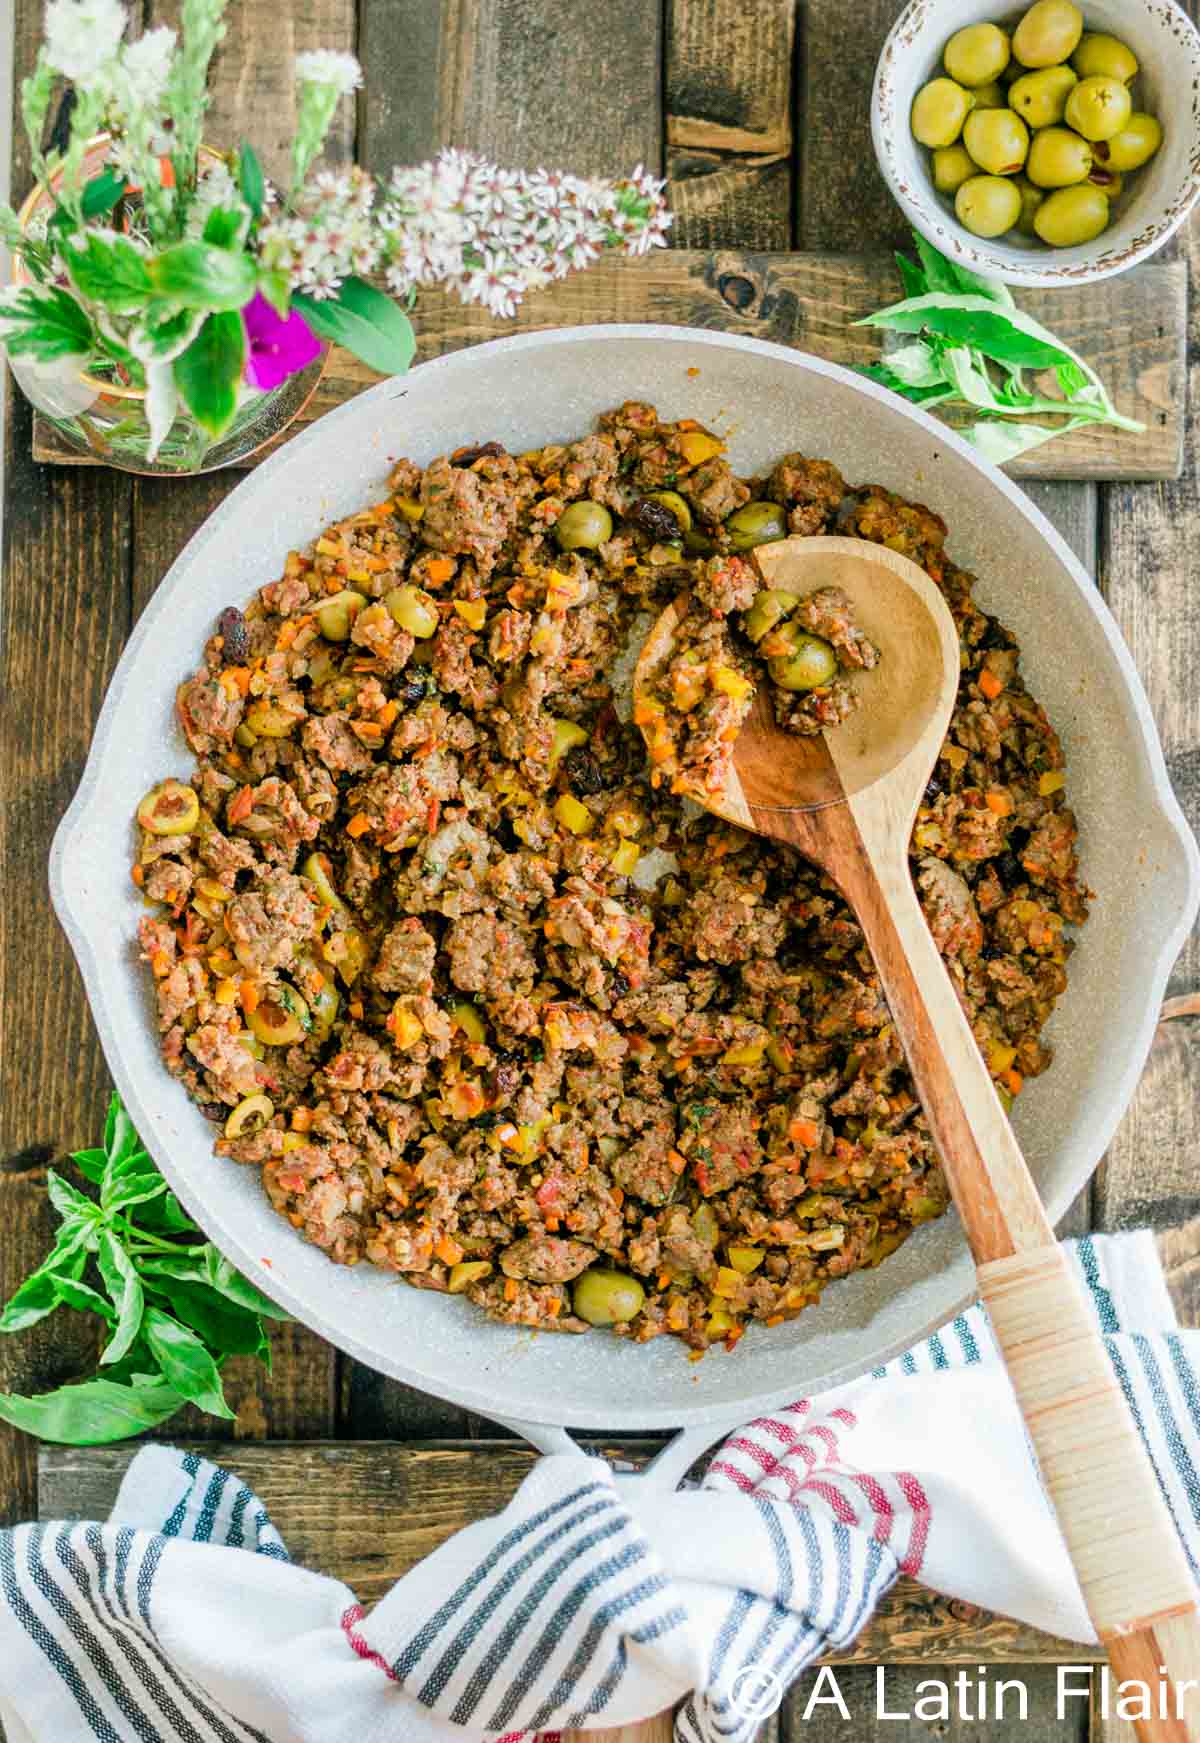 cooked-Puerto-rican-picadillo-recipe-in-a-frying-pan